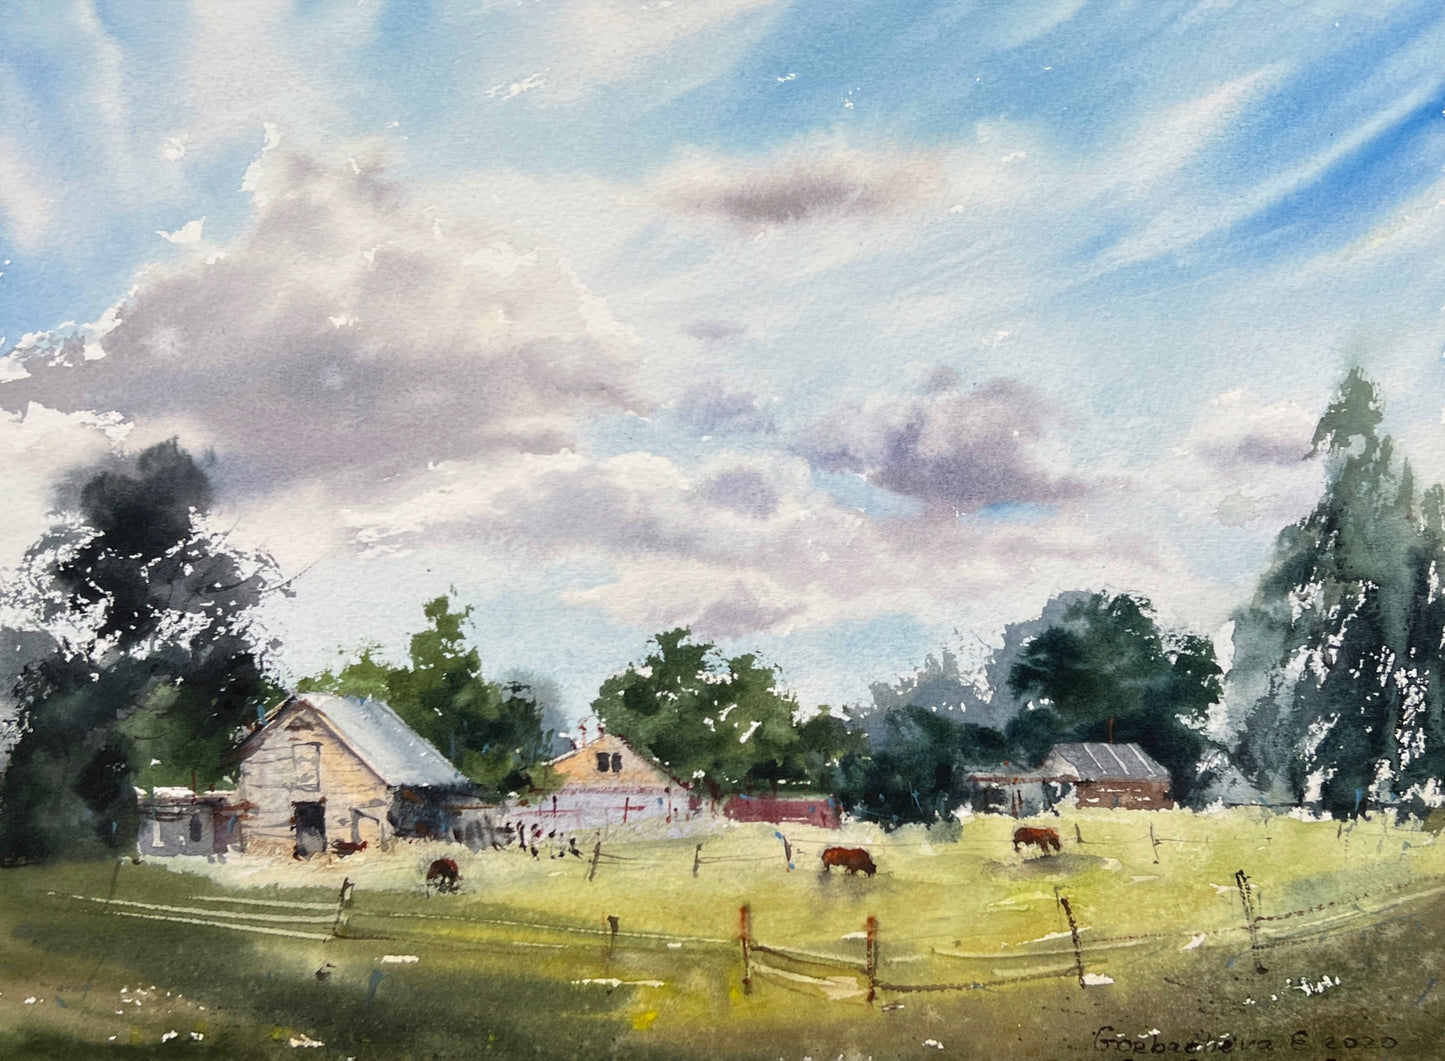 Summer Farm Painting Watercolor Original, Farmhouse Art Decor, Country Landscape With Cows & Barn, Scenery Painting